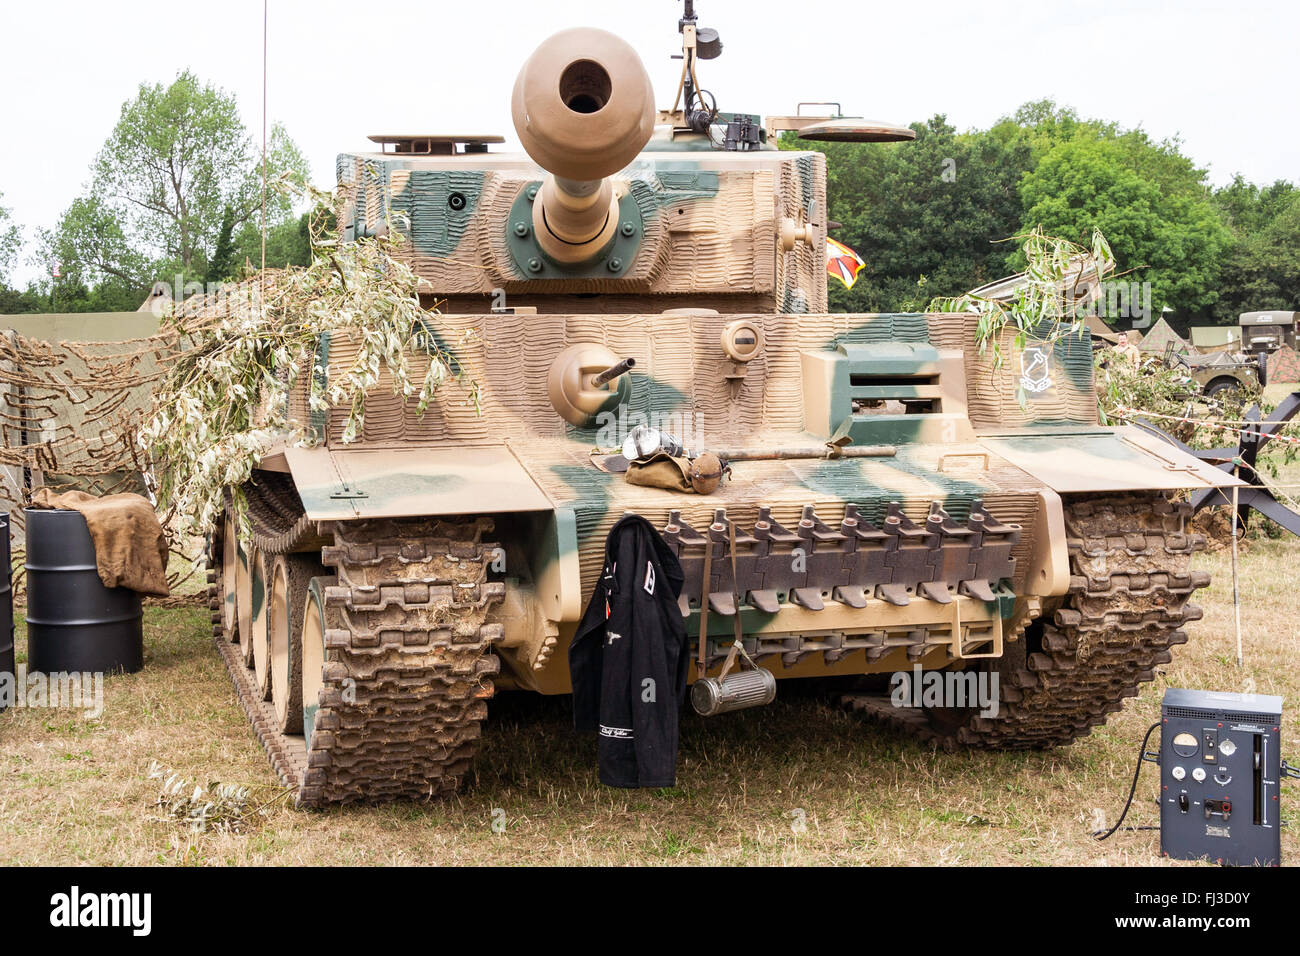 Second world was re-enactment. Front view of German Tiger tank in green and brown camouflage pattern, with 88mm gun. Stock Photo